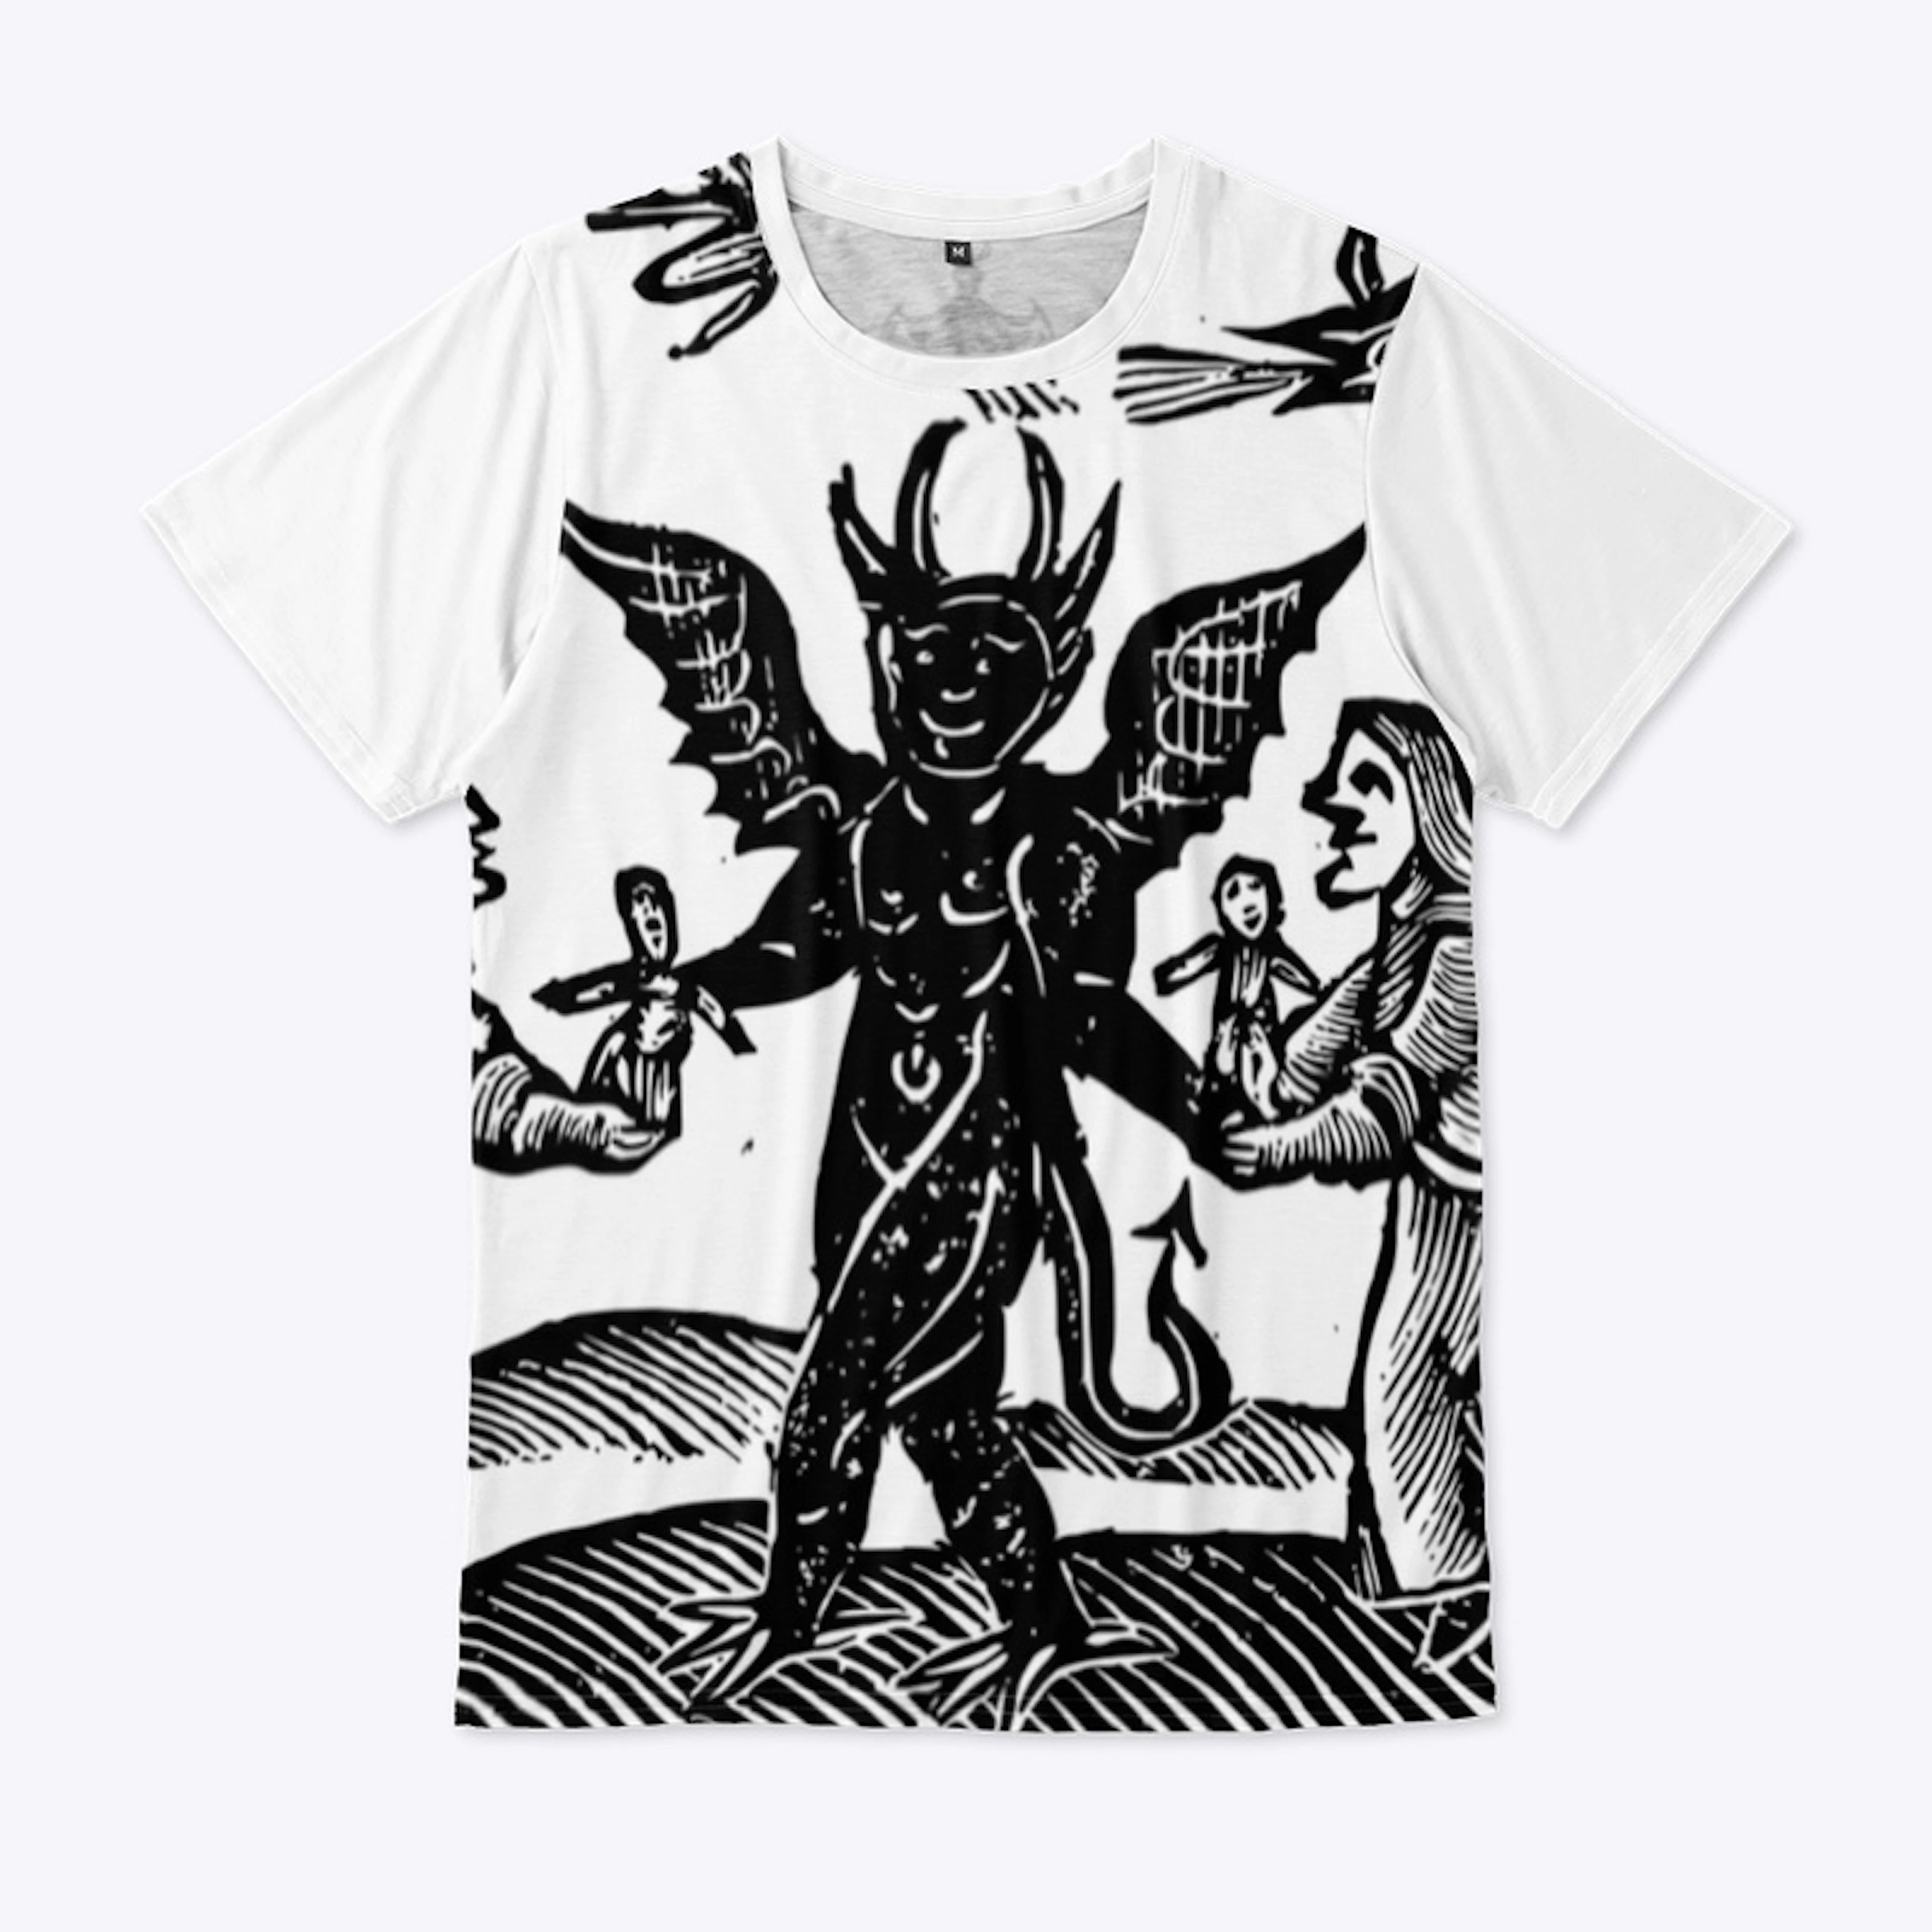 The Devil Made Me Do It! T-shirt